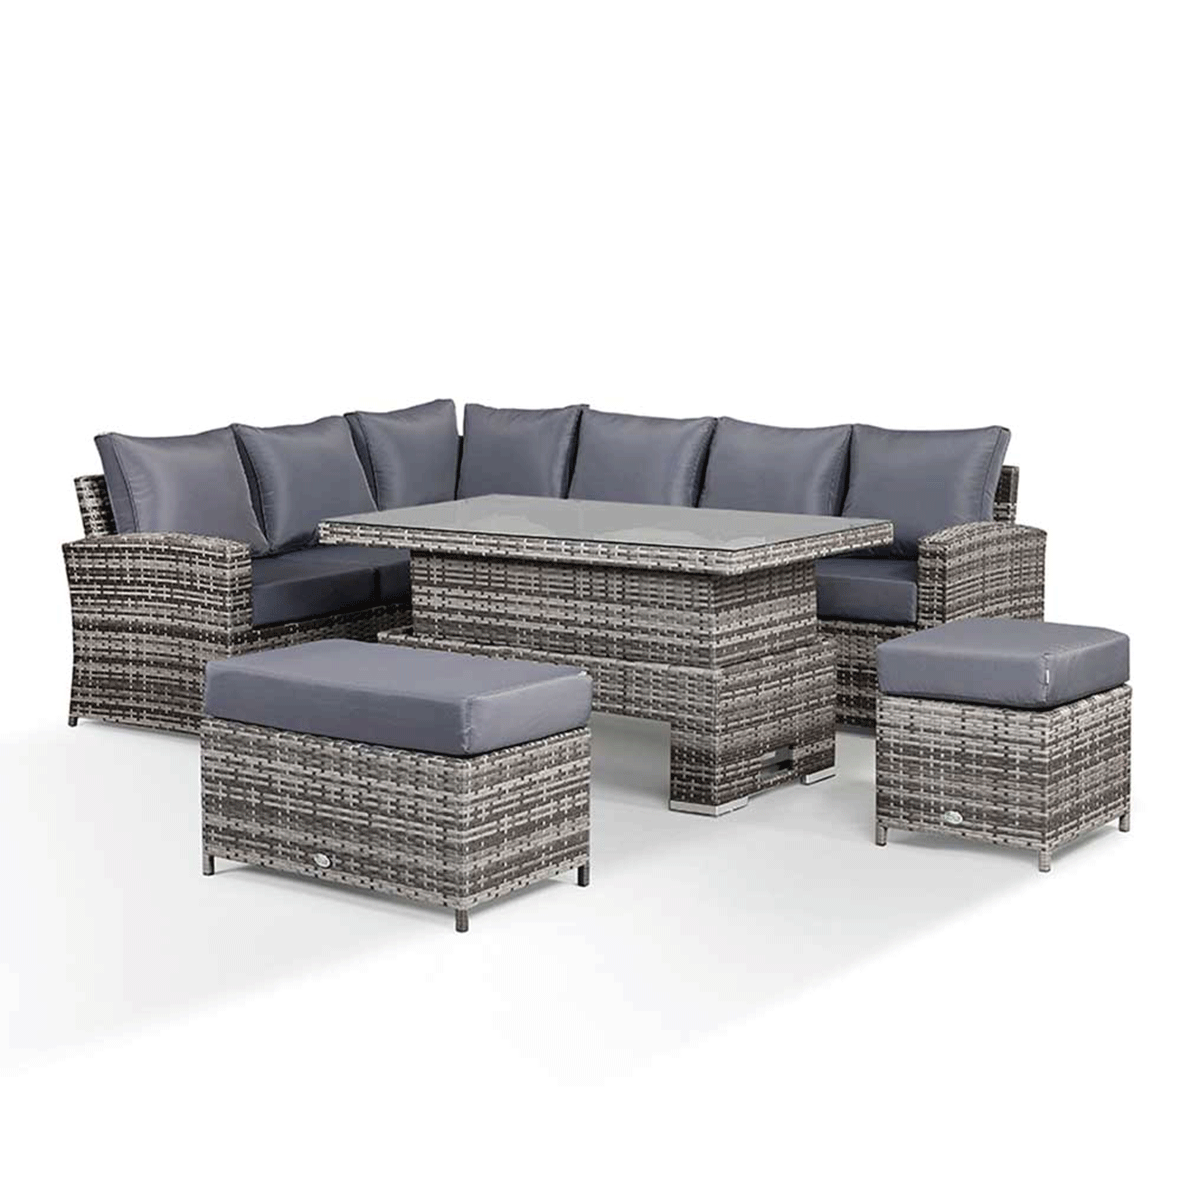 Club Rattan Harmony Outdoor Corner Sofa Set with Rising Table in Grey